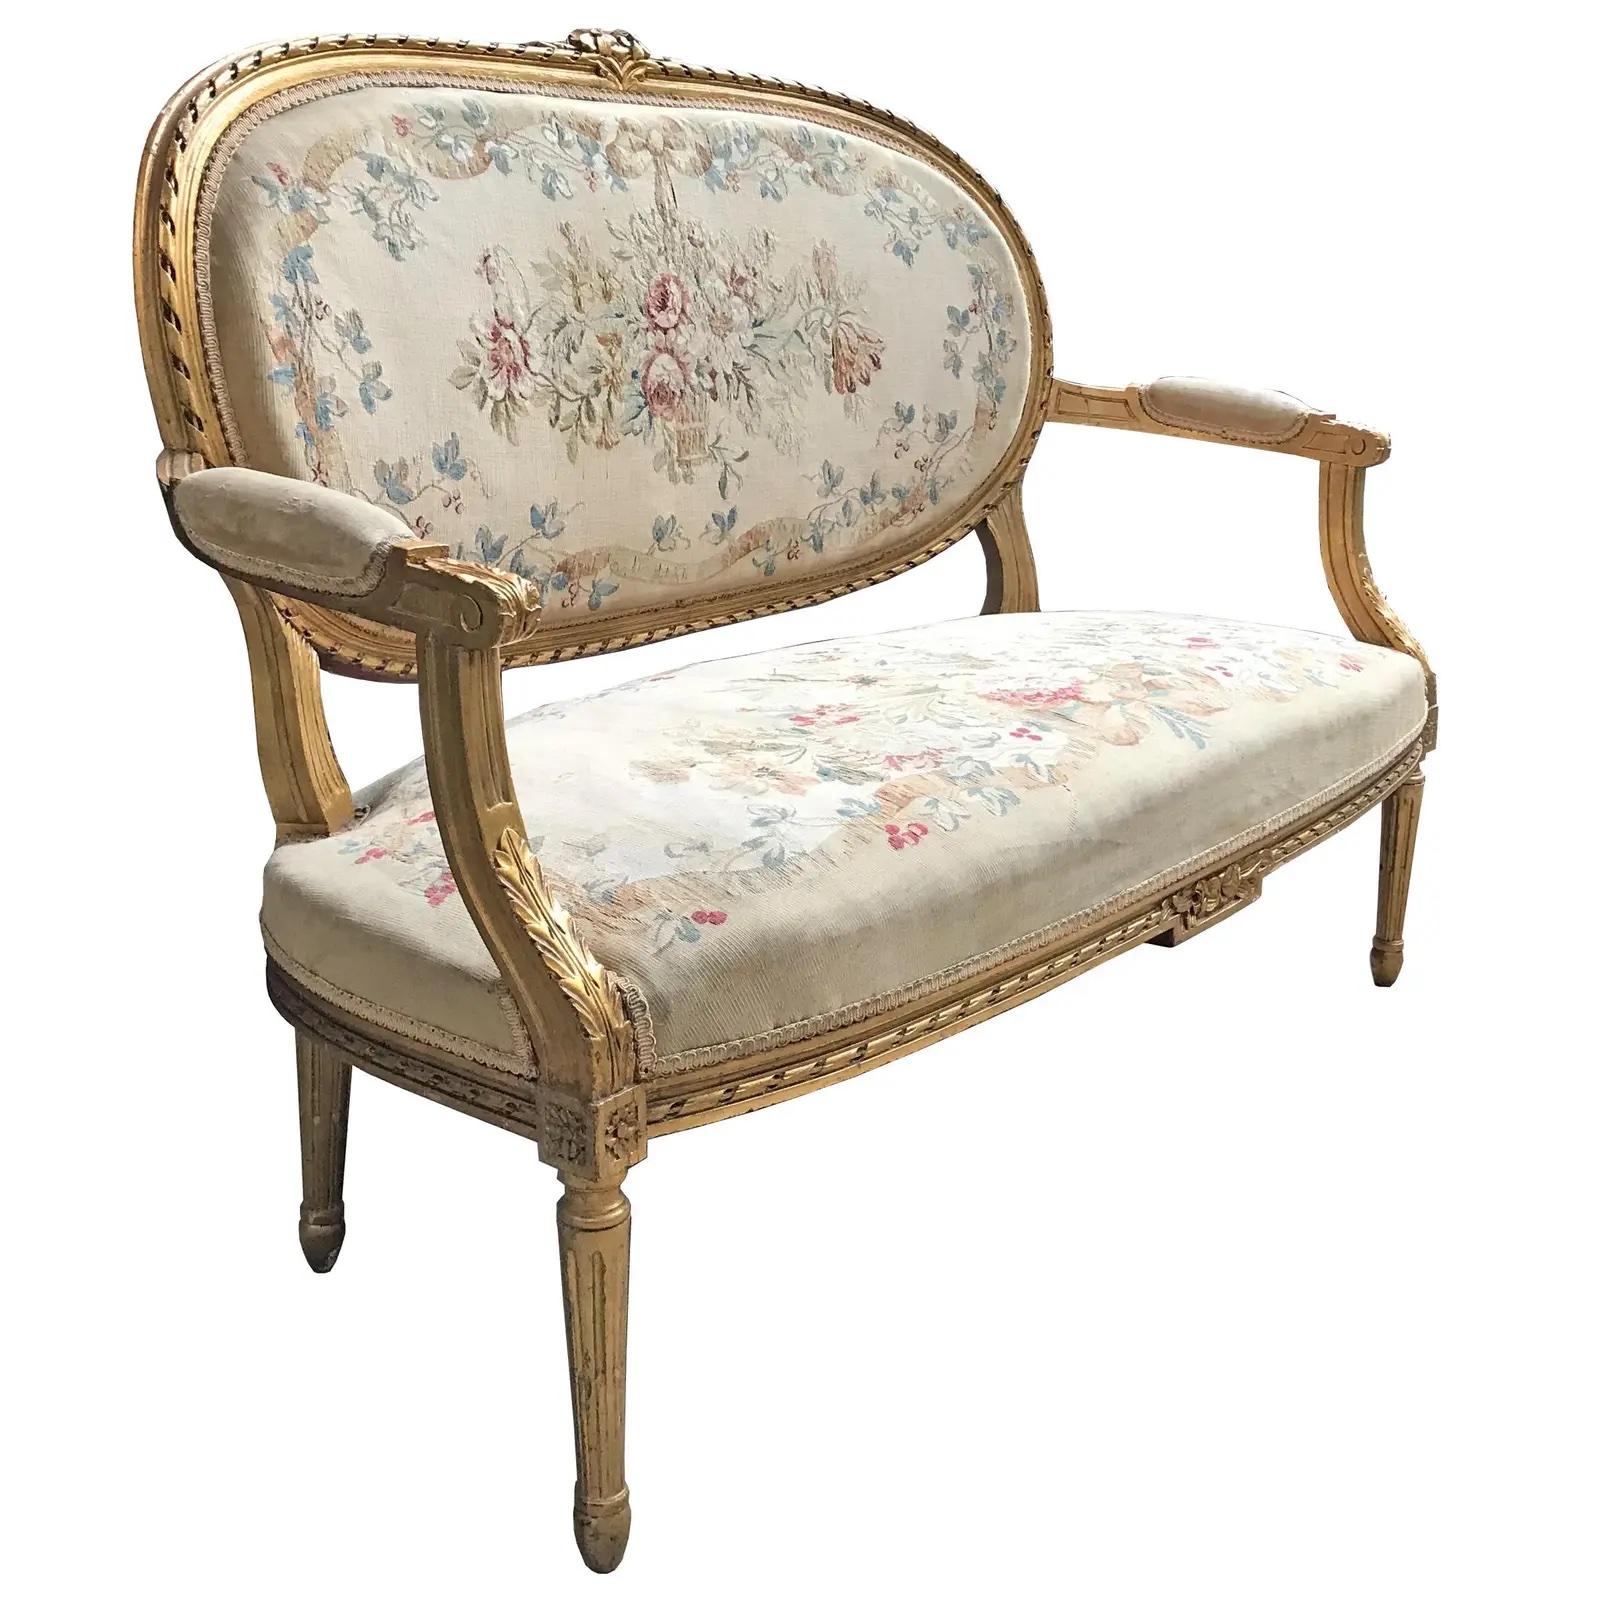 A 19th century French Louis XVI style giltwood settee with a floral cartouche at the top of the back, and circled in a carved ribbon motif, with fluted and tapered legs. The back and seat are upholstered in a floral Aubusson with large-scale